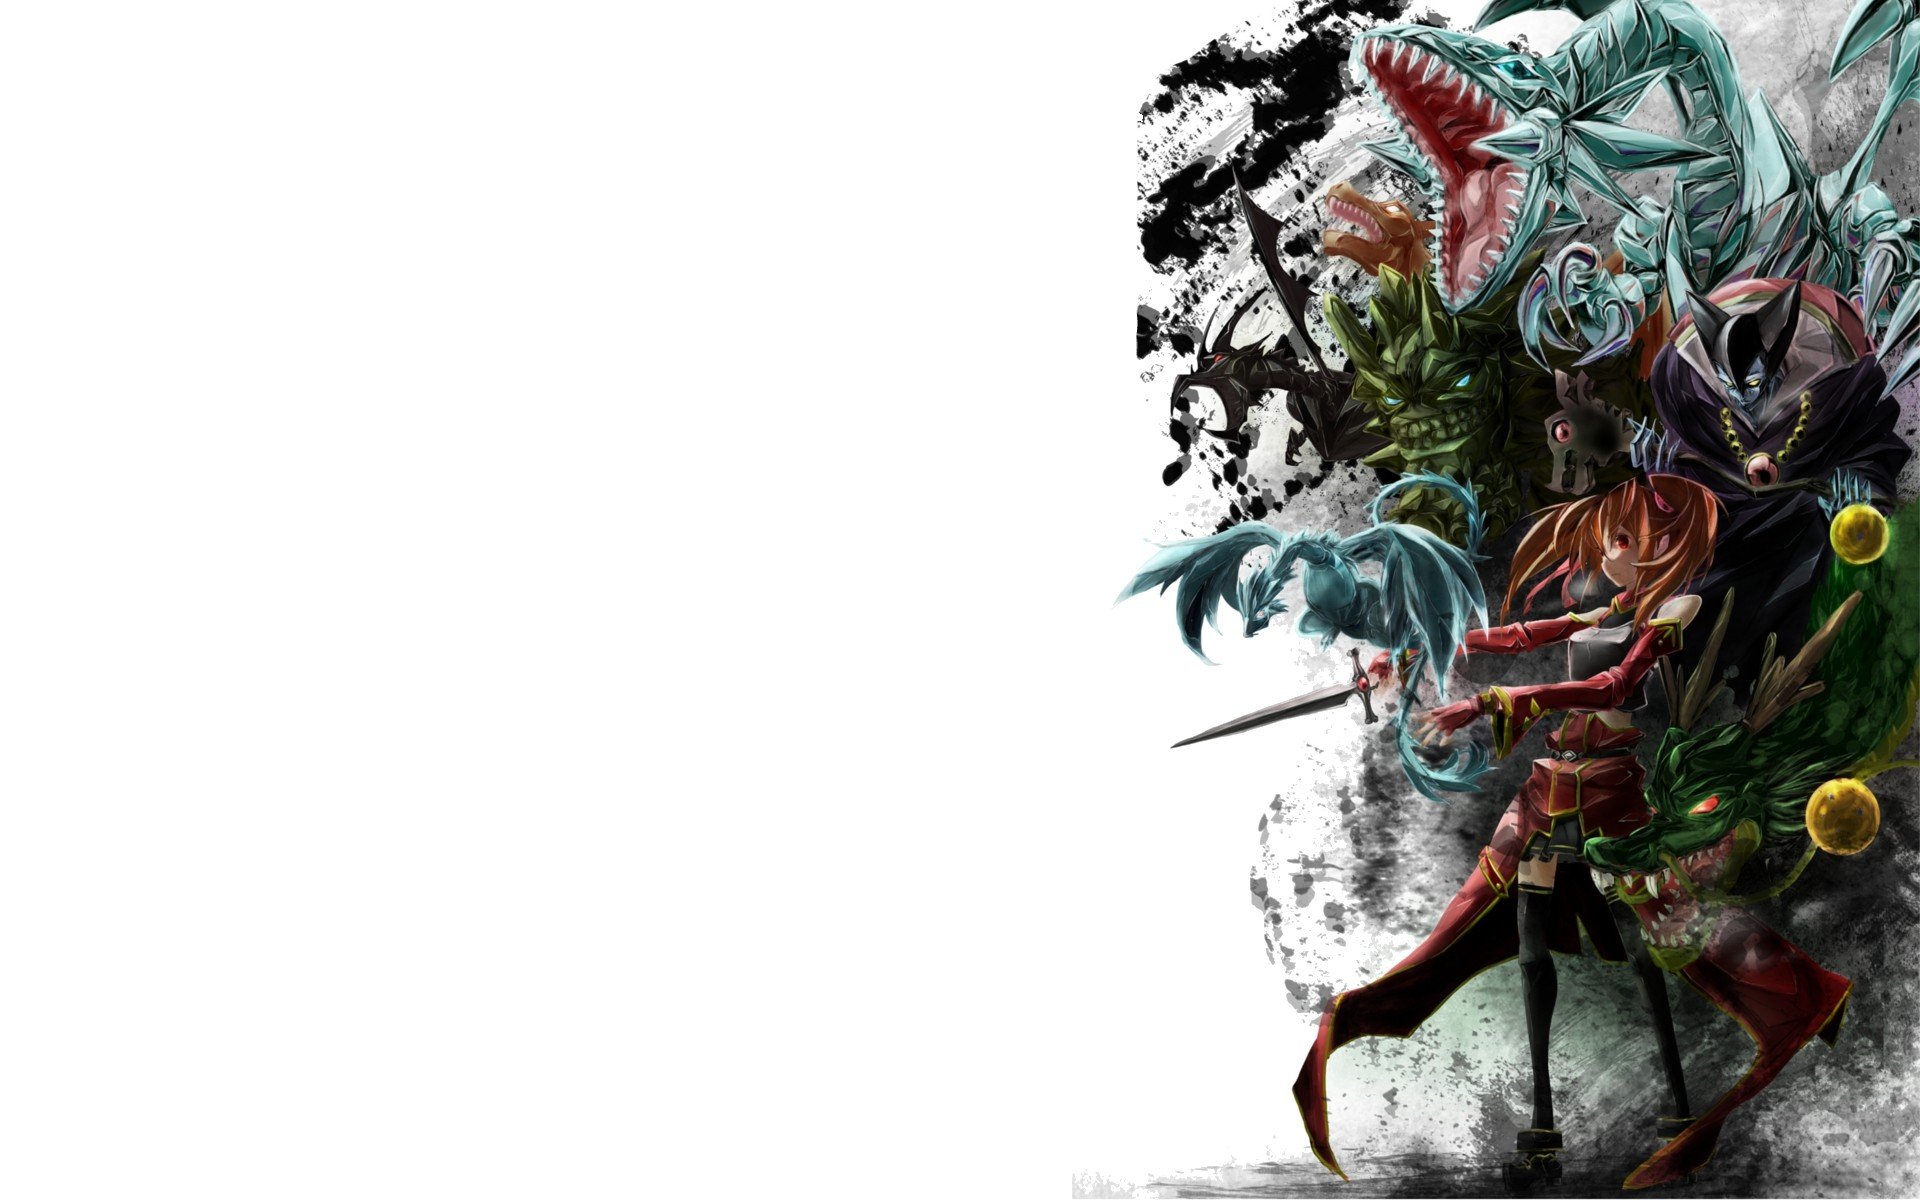  SAO White Anime monsters dragons weapons sword wallpaper background